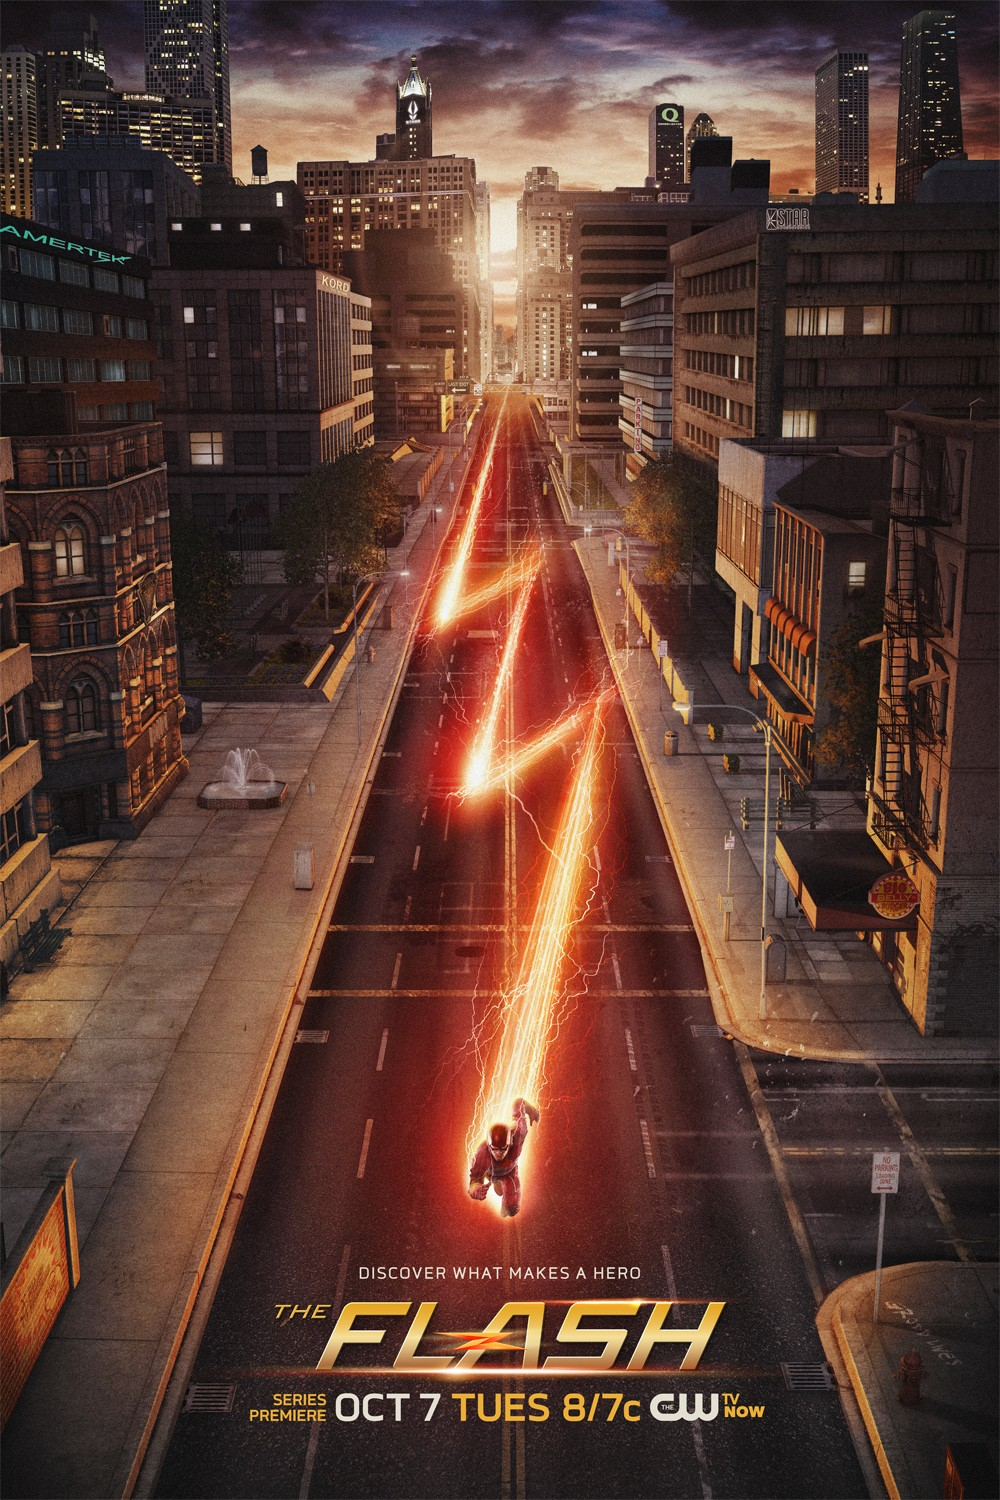 The_Flash_promo_poster_-_Discover_what_makes_a_hero.png